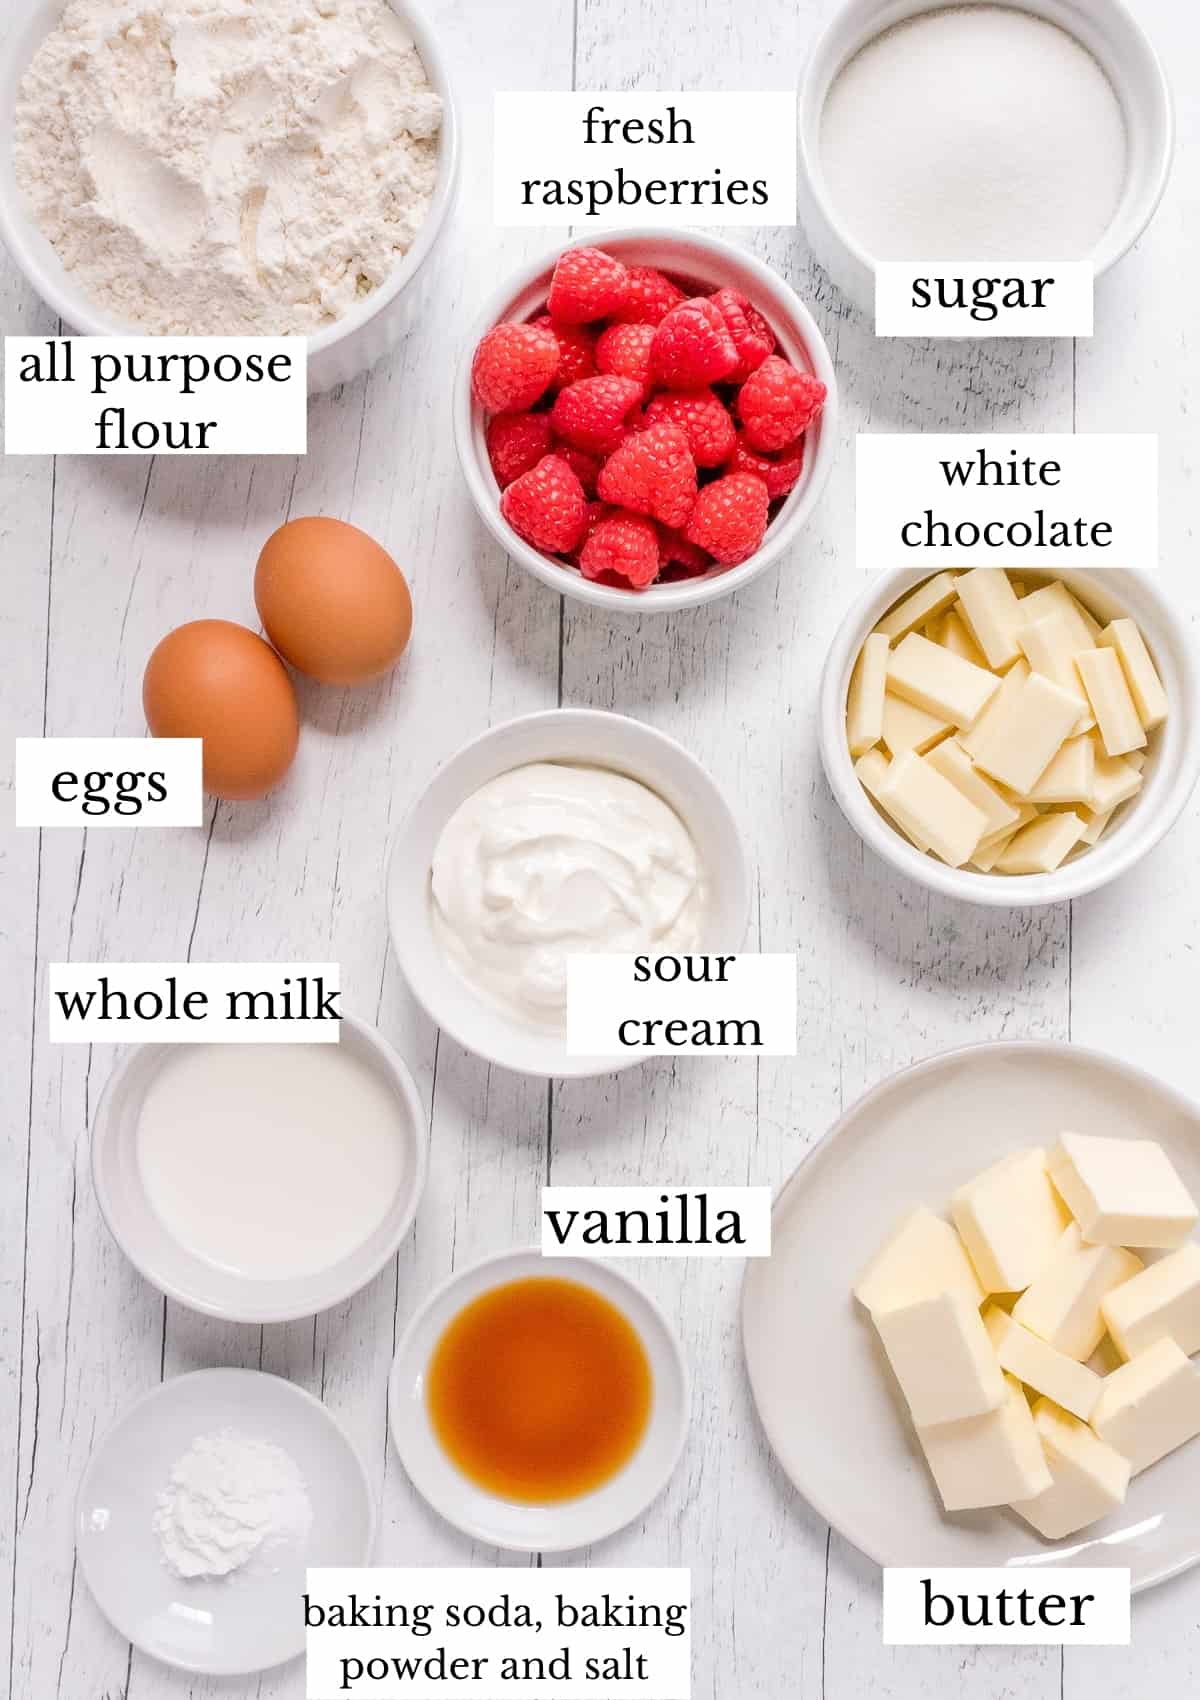 ingredients for white chocolate and raspberry muffins on white board